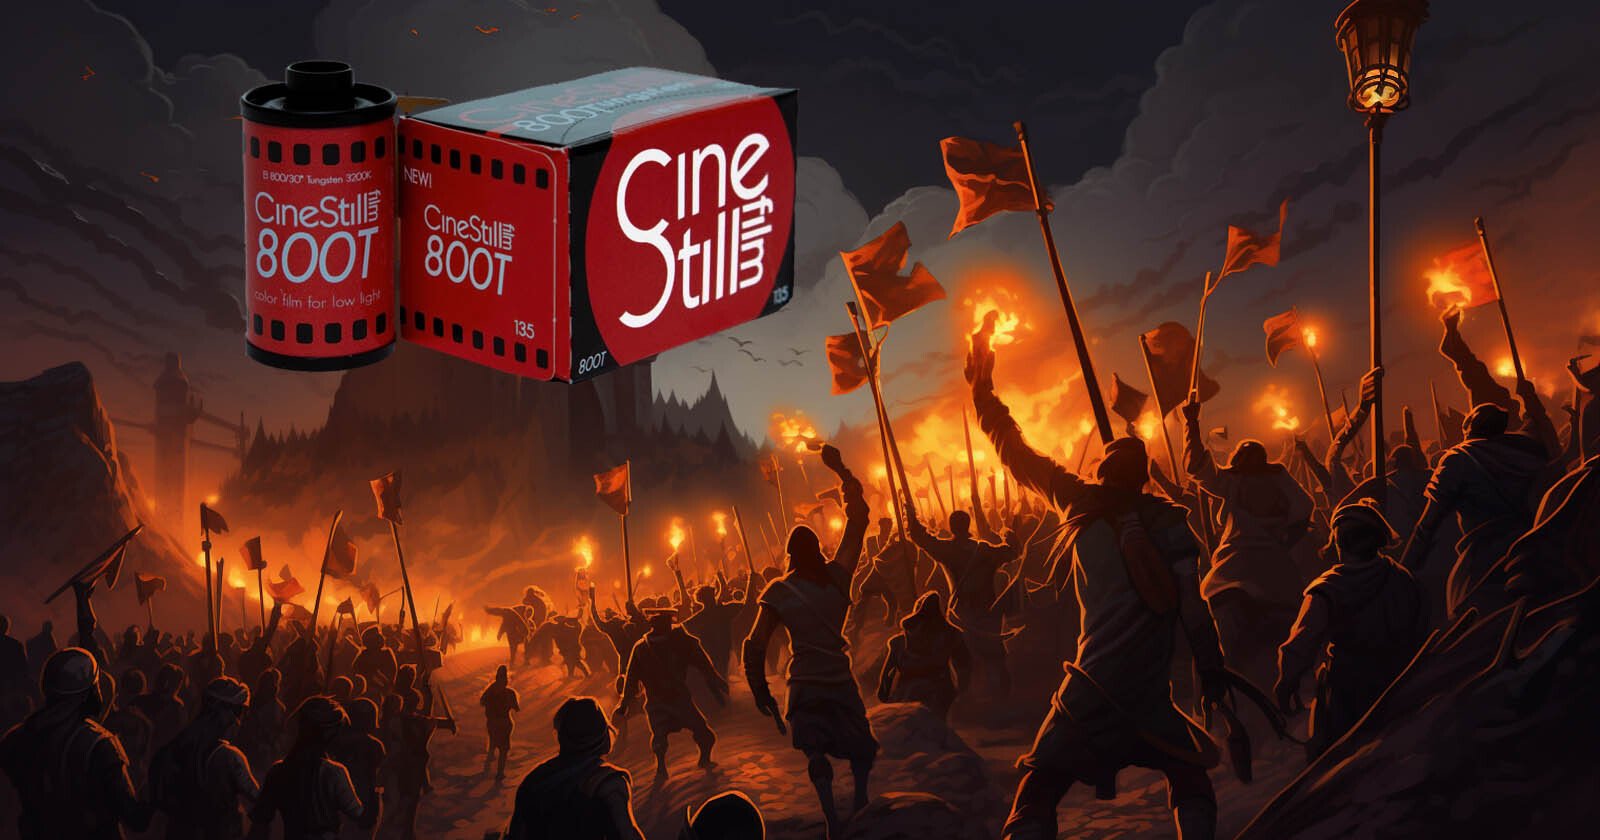 Film Brand CineStill Swarmed by an Angry Mob Stoked by Misinformation